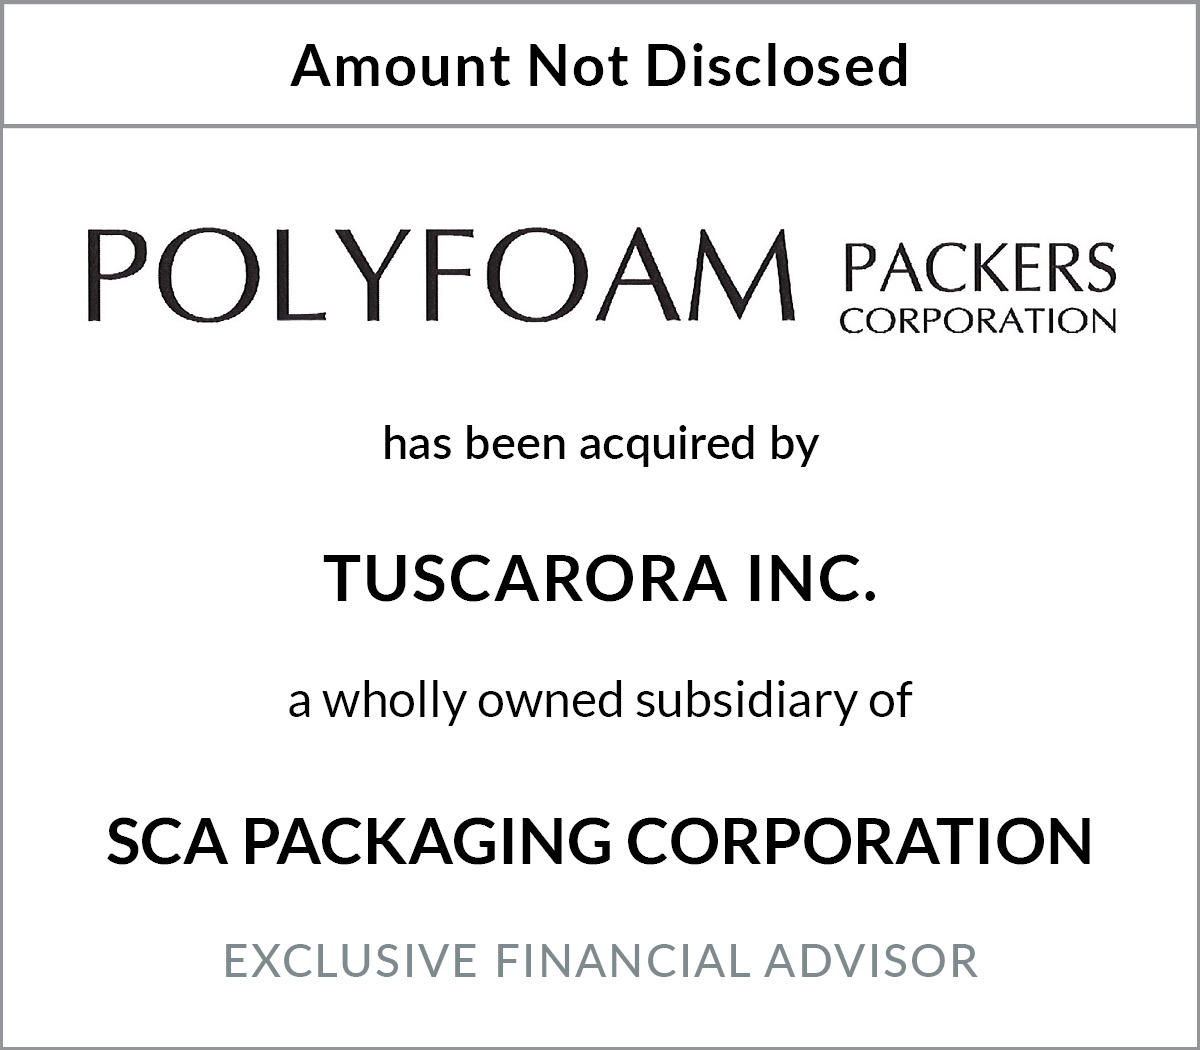 Polyfoam Packers Corporation has been acquired by Tuscarora Inc.